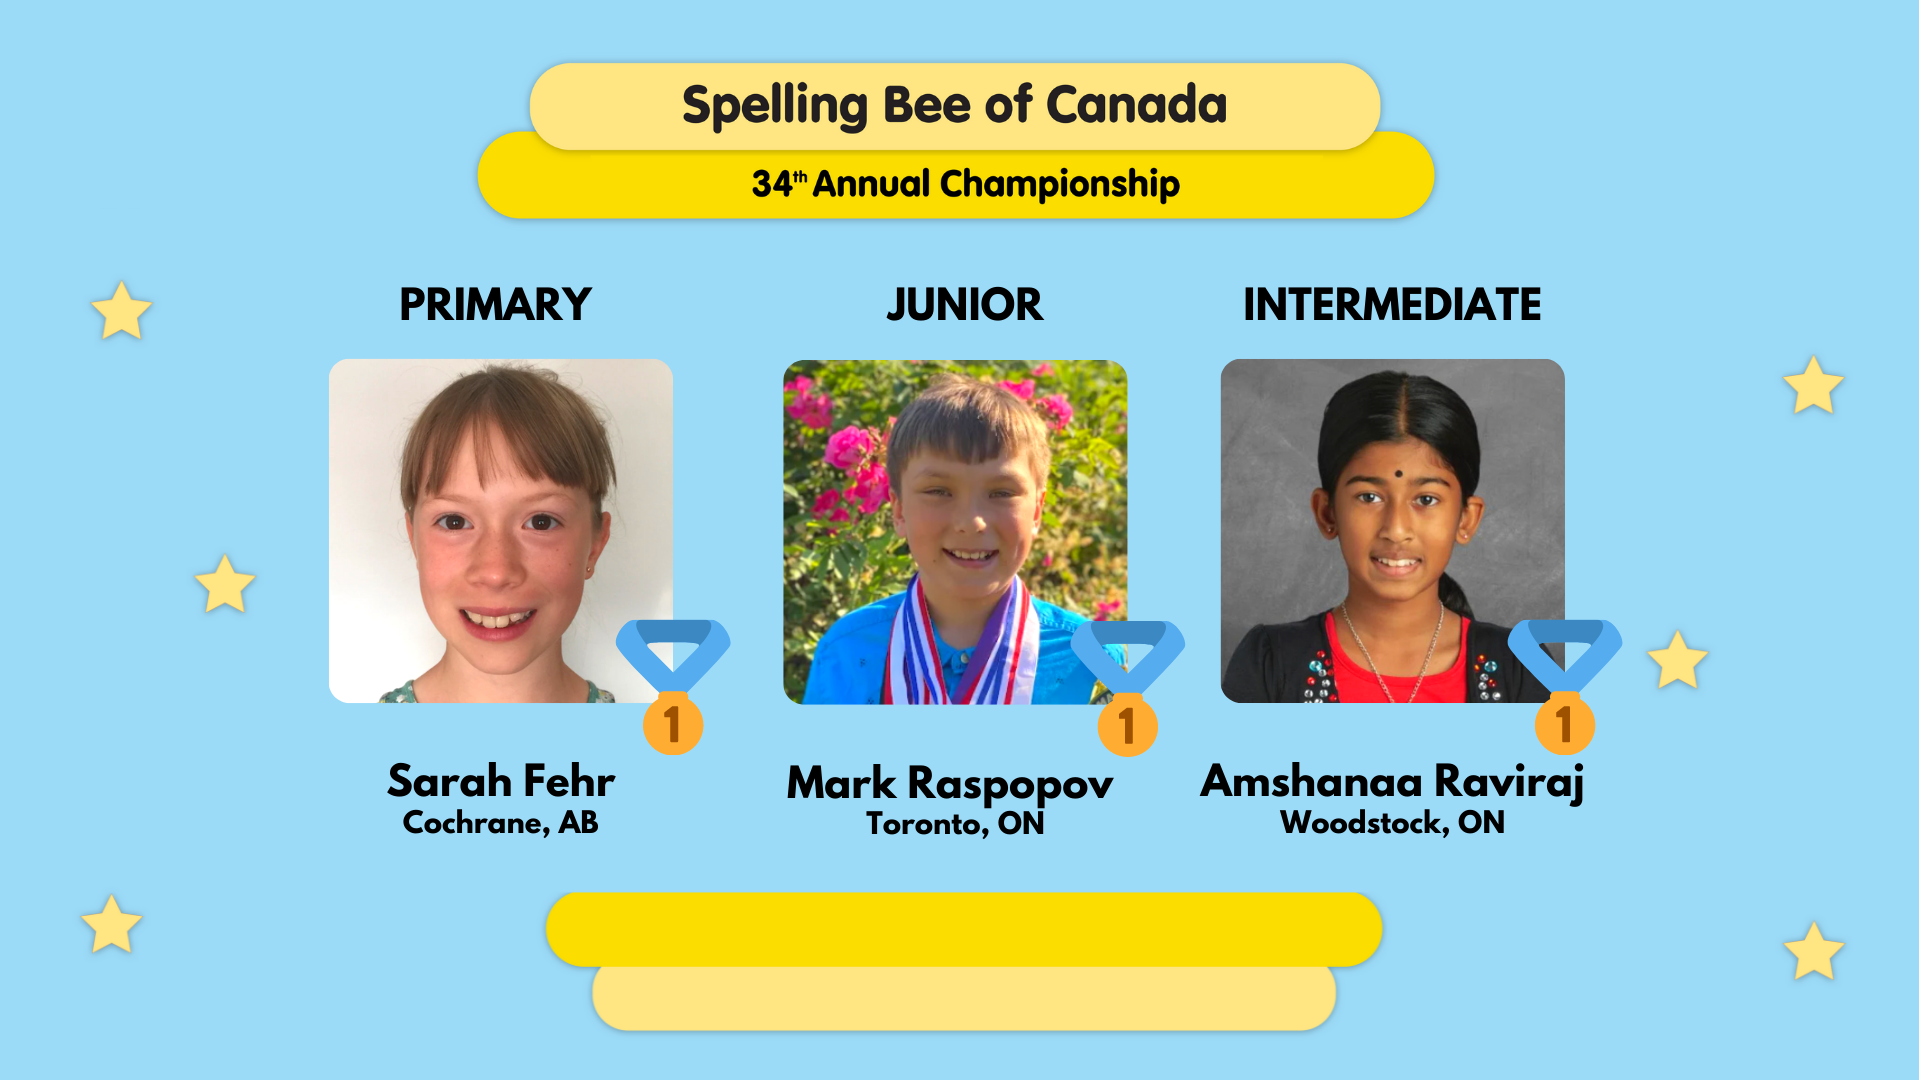 Spelling Bee of Canada - 2021 Championship Winners